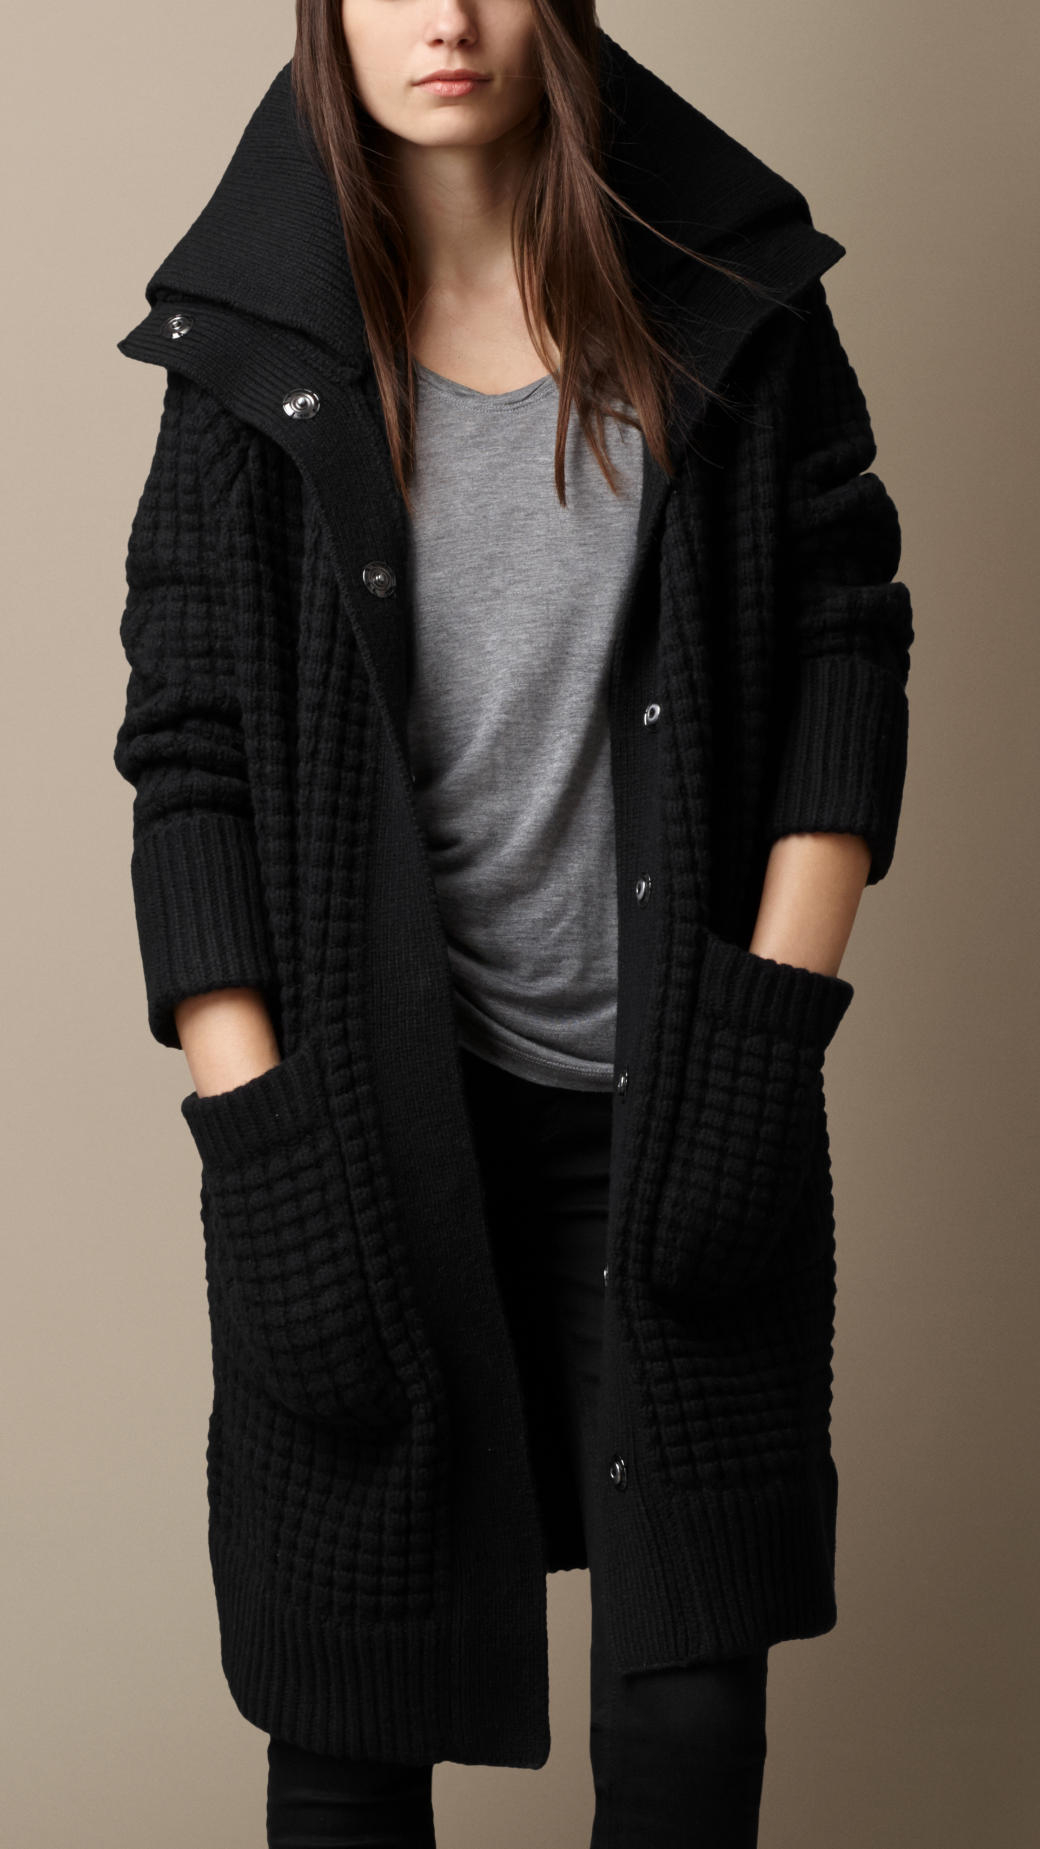 Burberry Wool Cashmere Knit Cardigan Coat in Black | Lyst